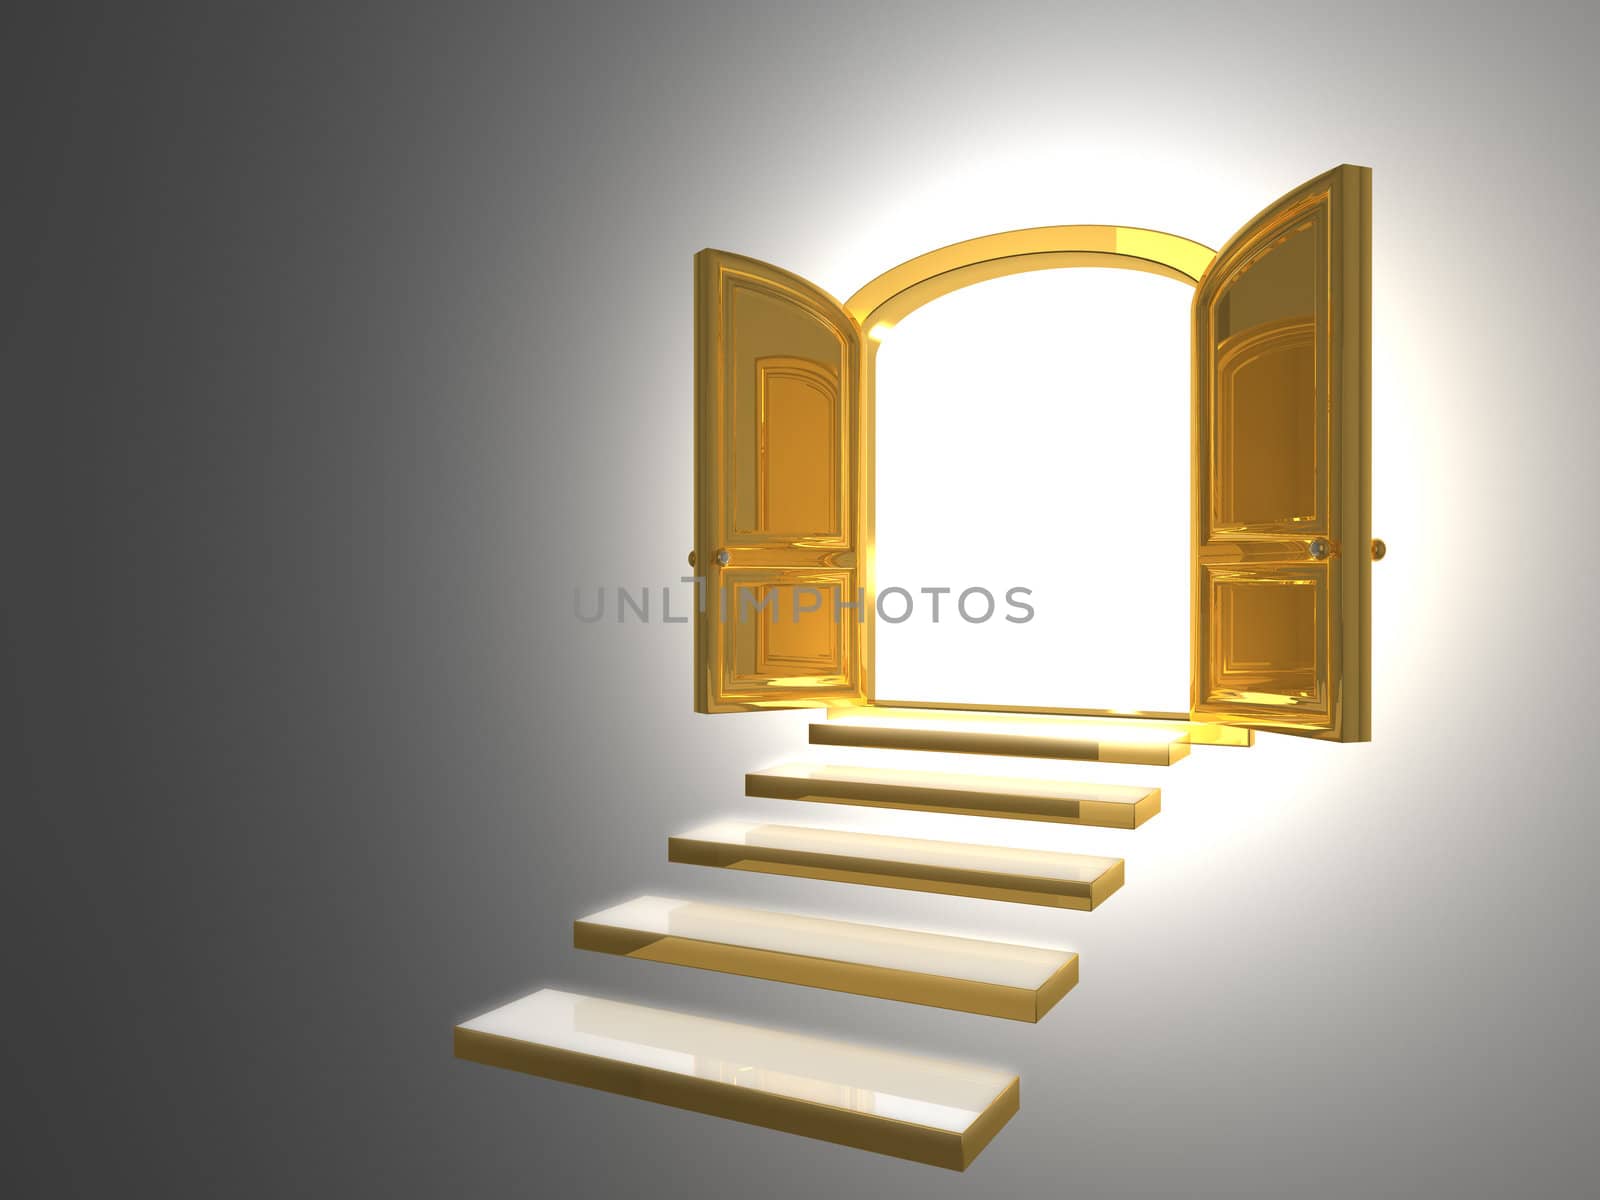 Big Golden Door opened on white with some gold steps